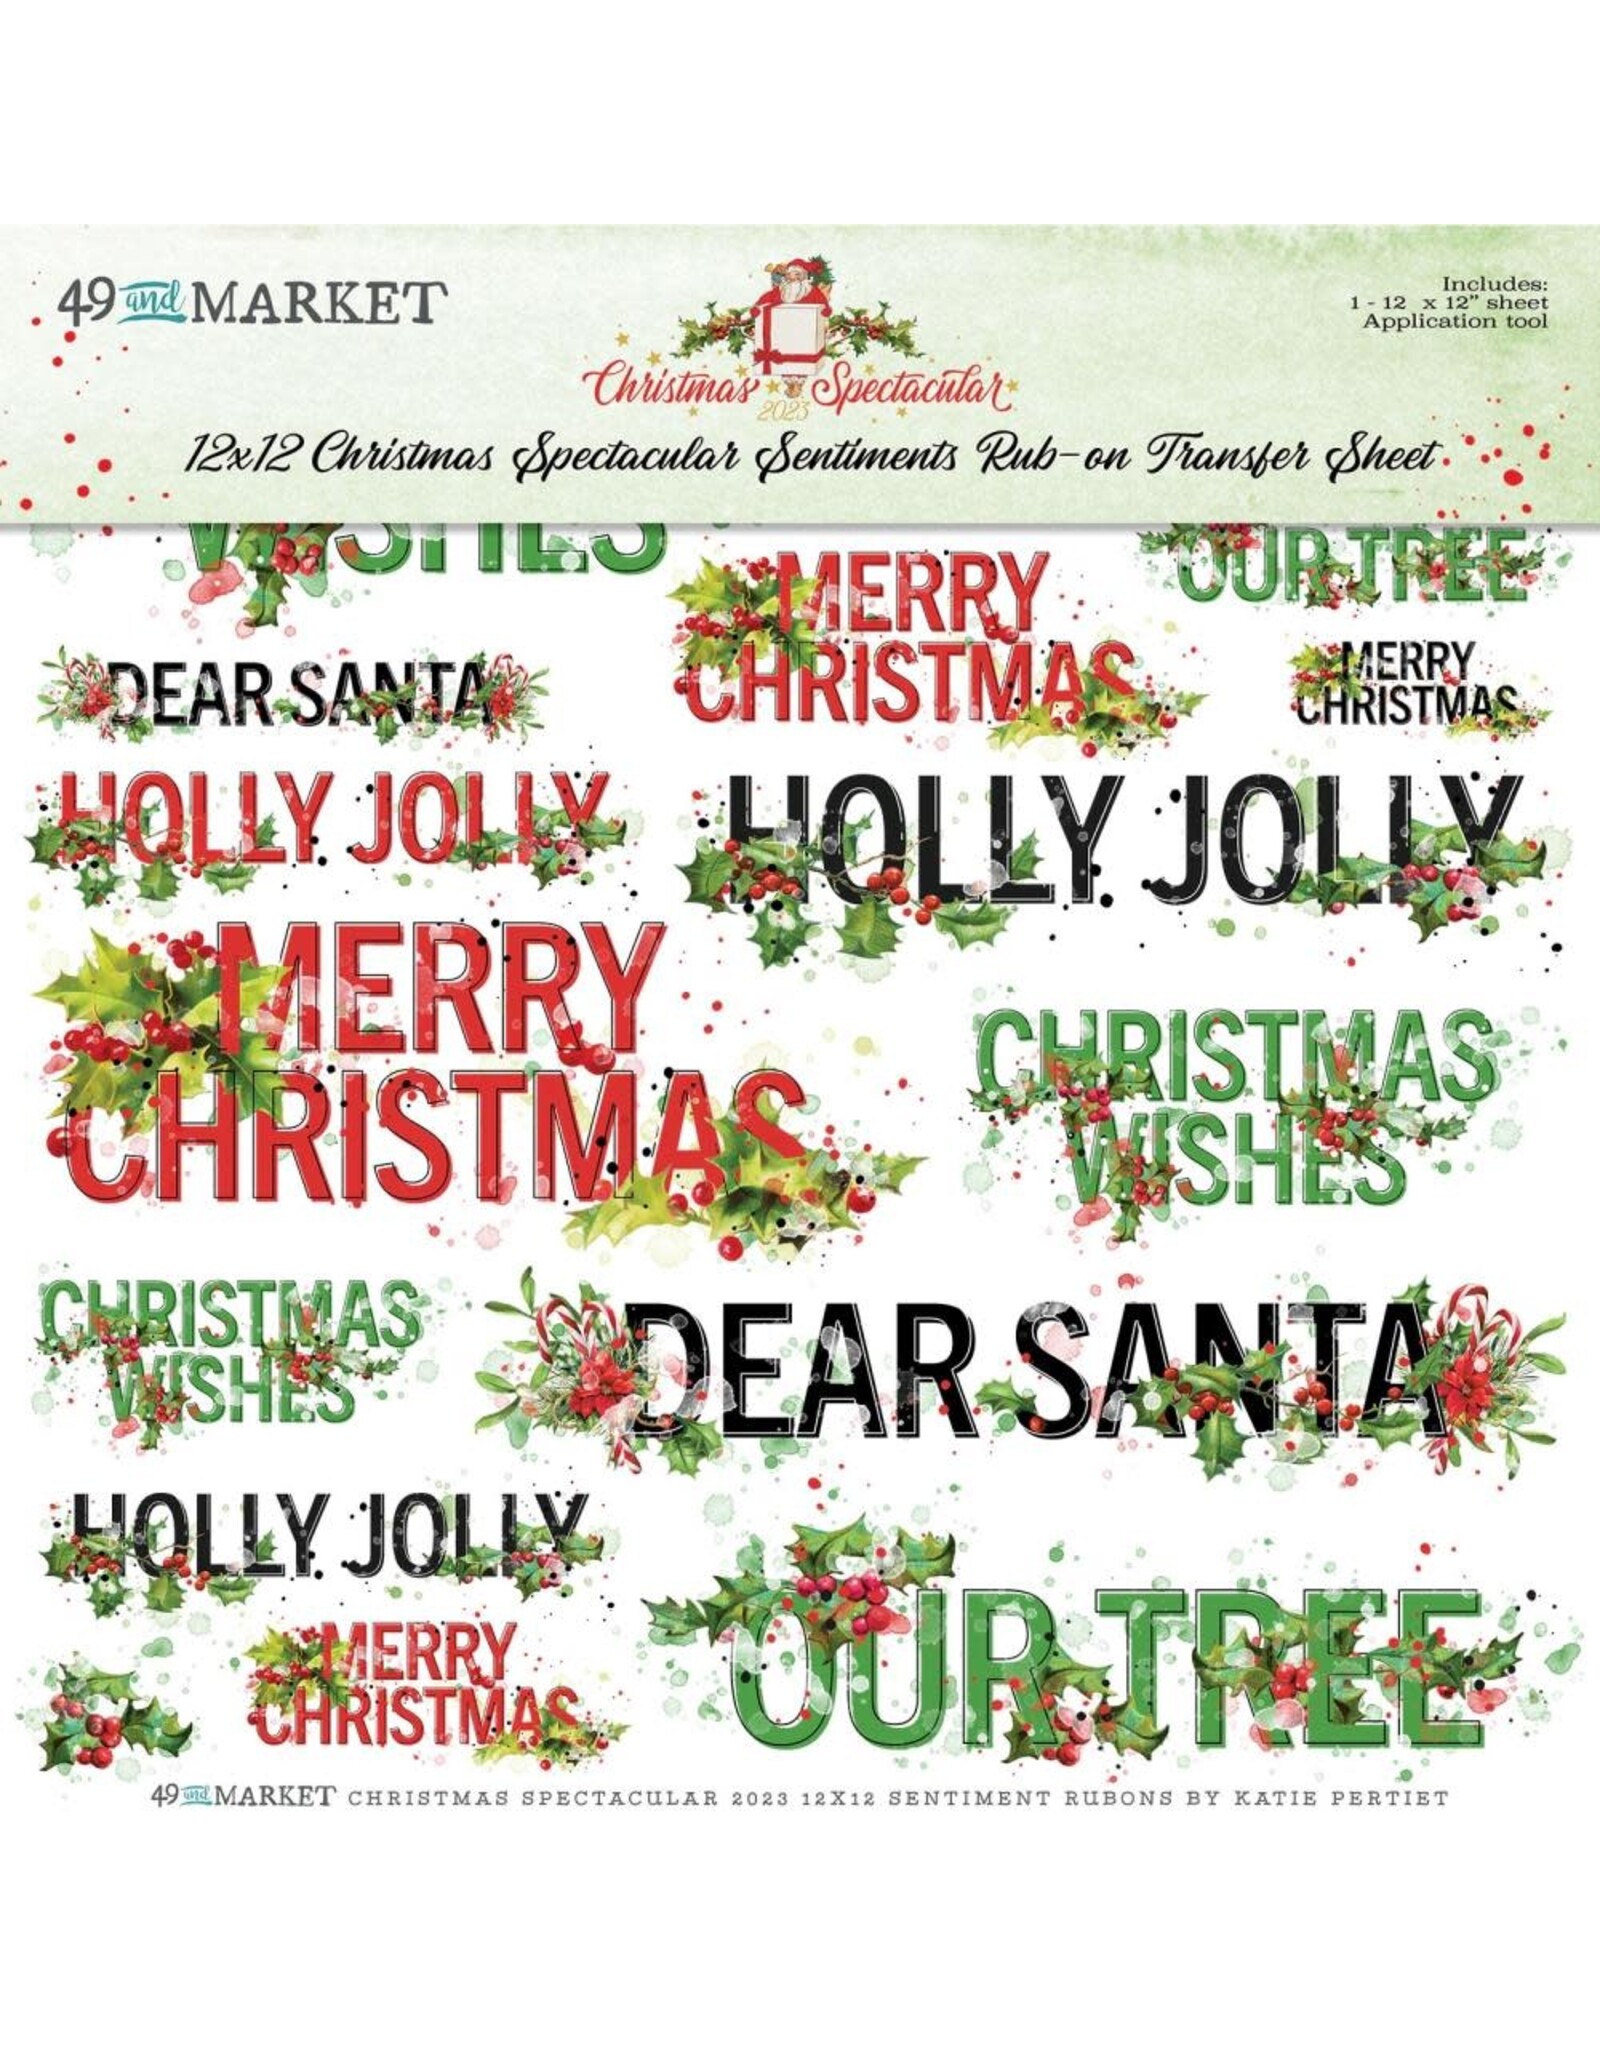 49 AND MARKET 49 AND MARKET CHRISTMAS SPECTACULAR 2023 SENTIMENTS 12x12 RUB-ON TRANSFER SHEET